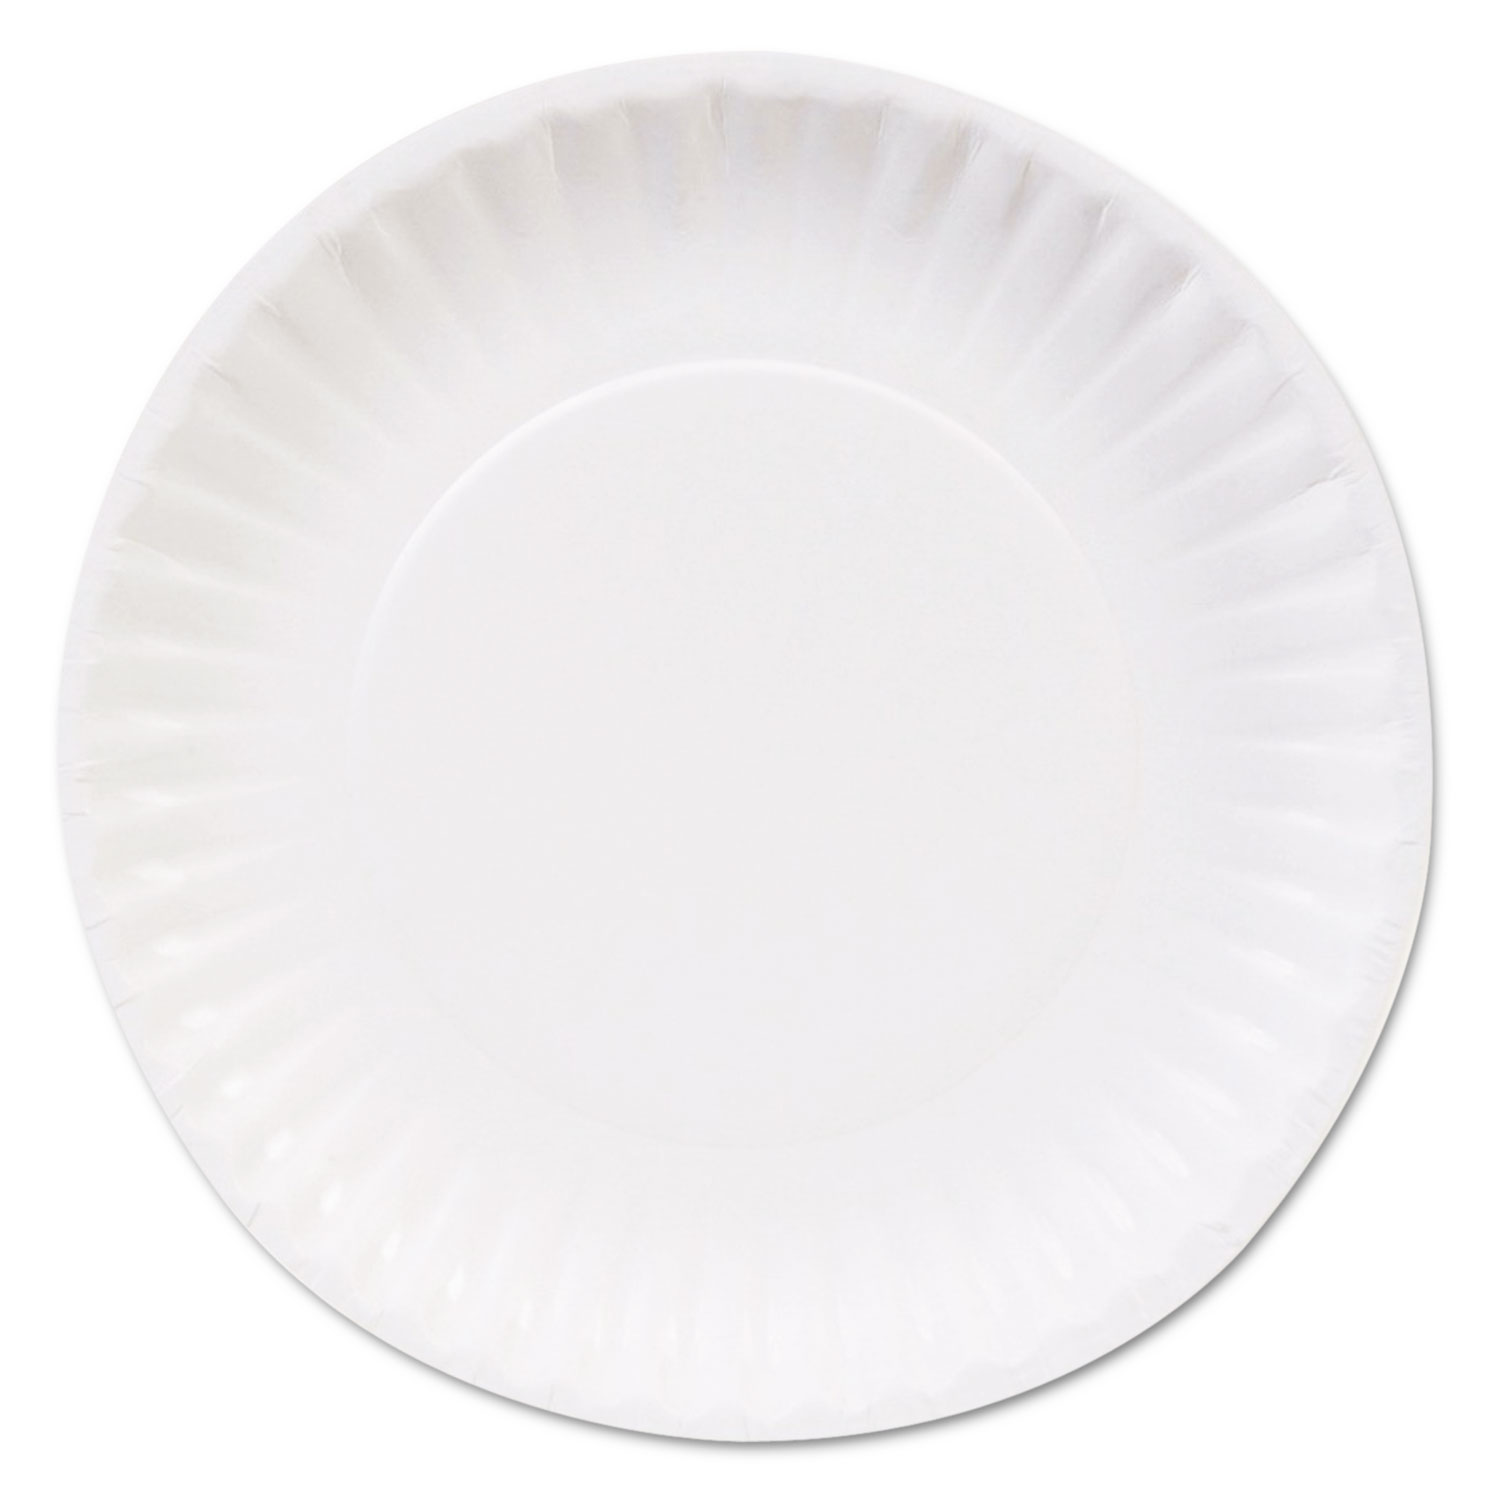  Dixie Basic DBP06W Clay Coated Paper Plates, 6, White, 100/Pack (DXEDBP06W) 